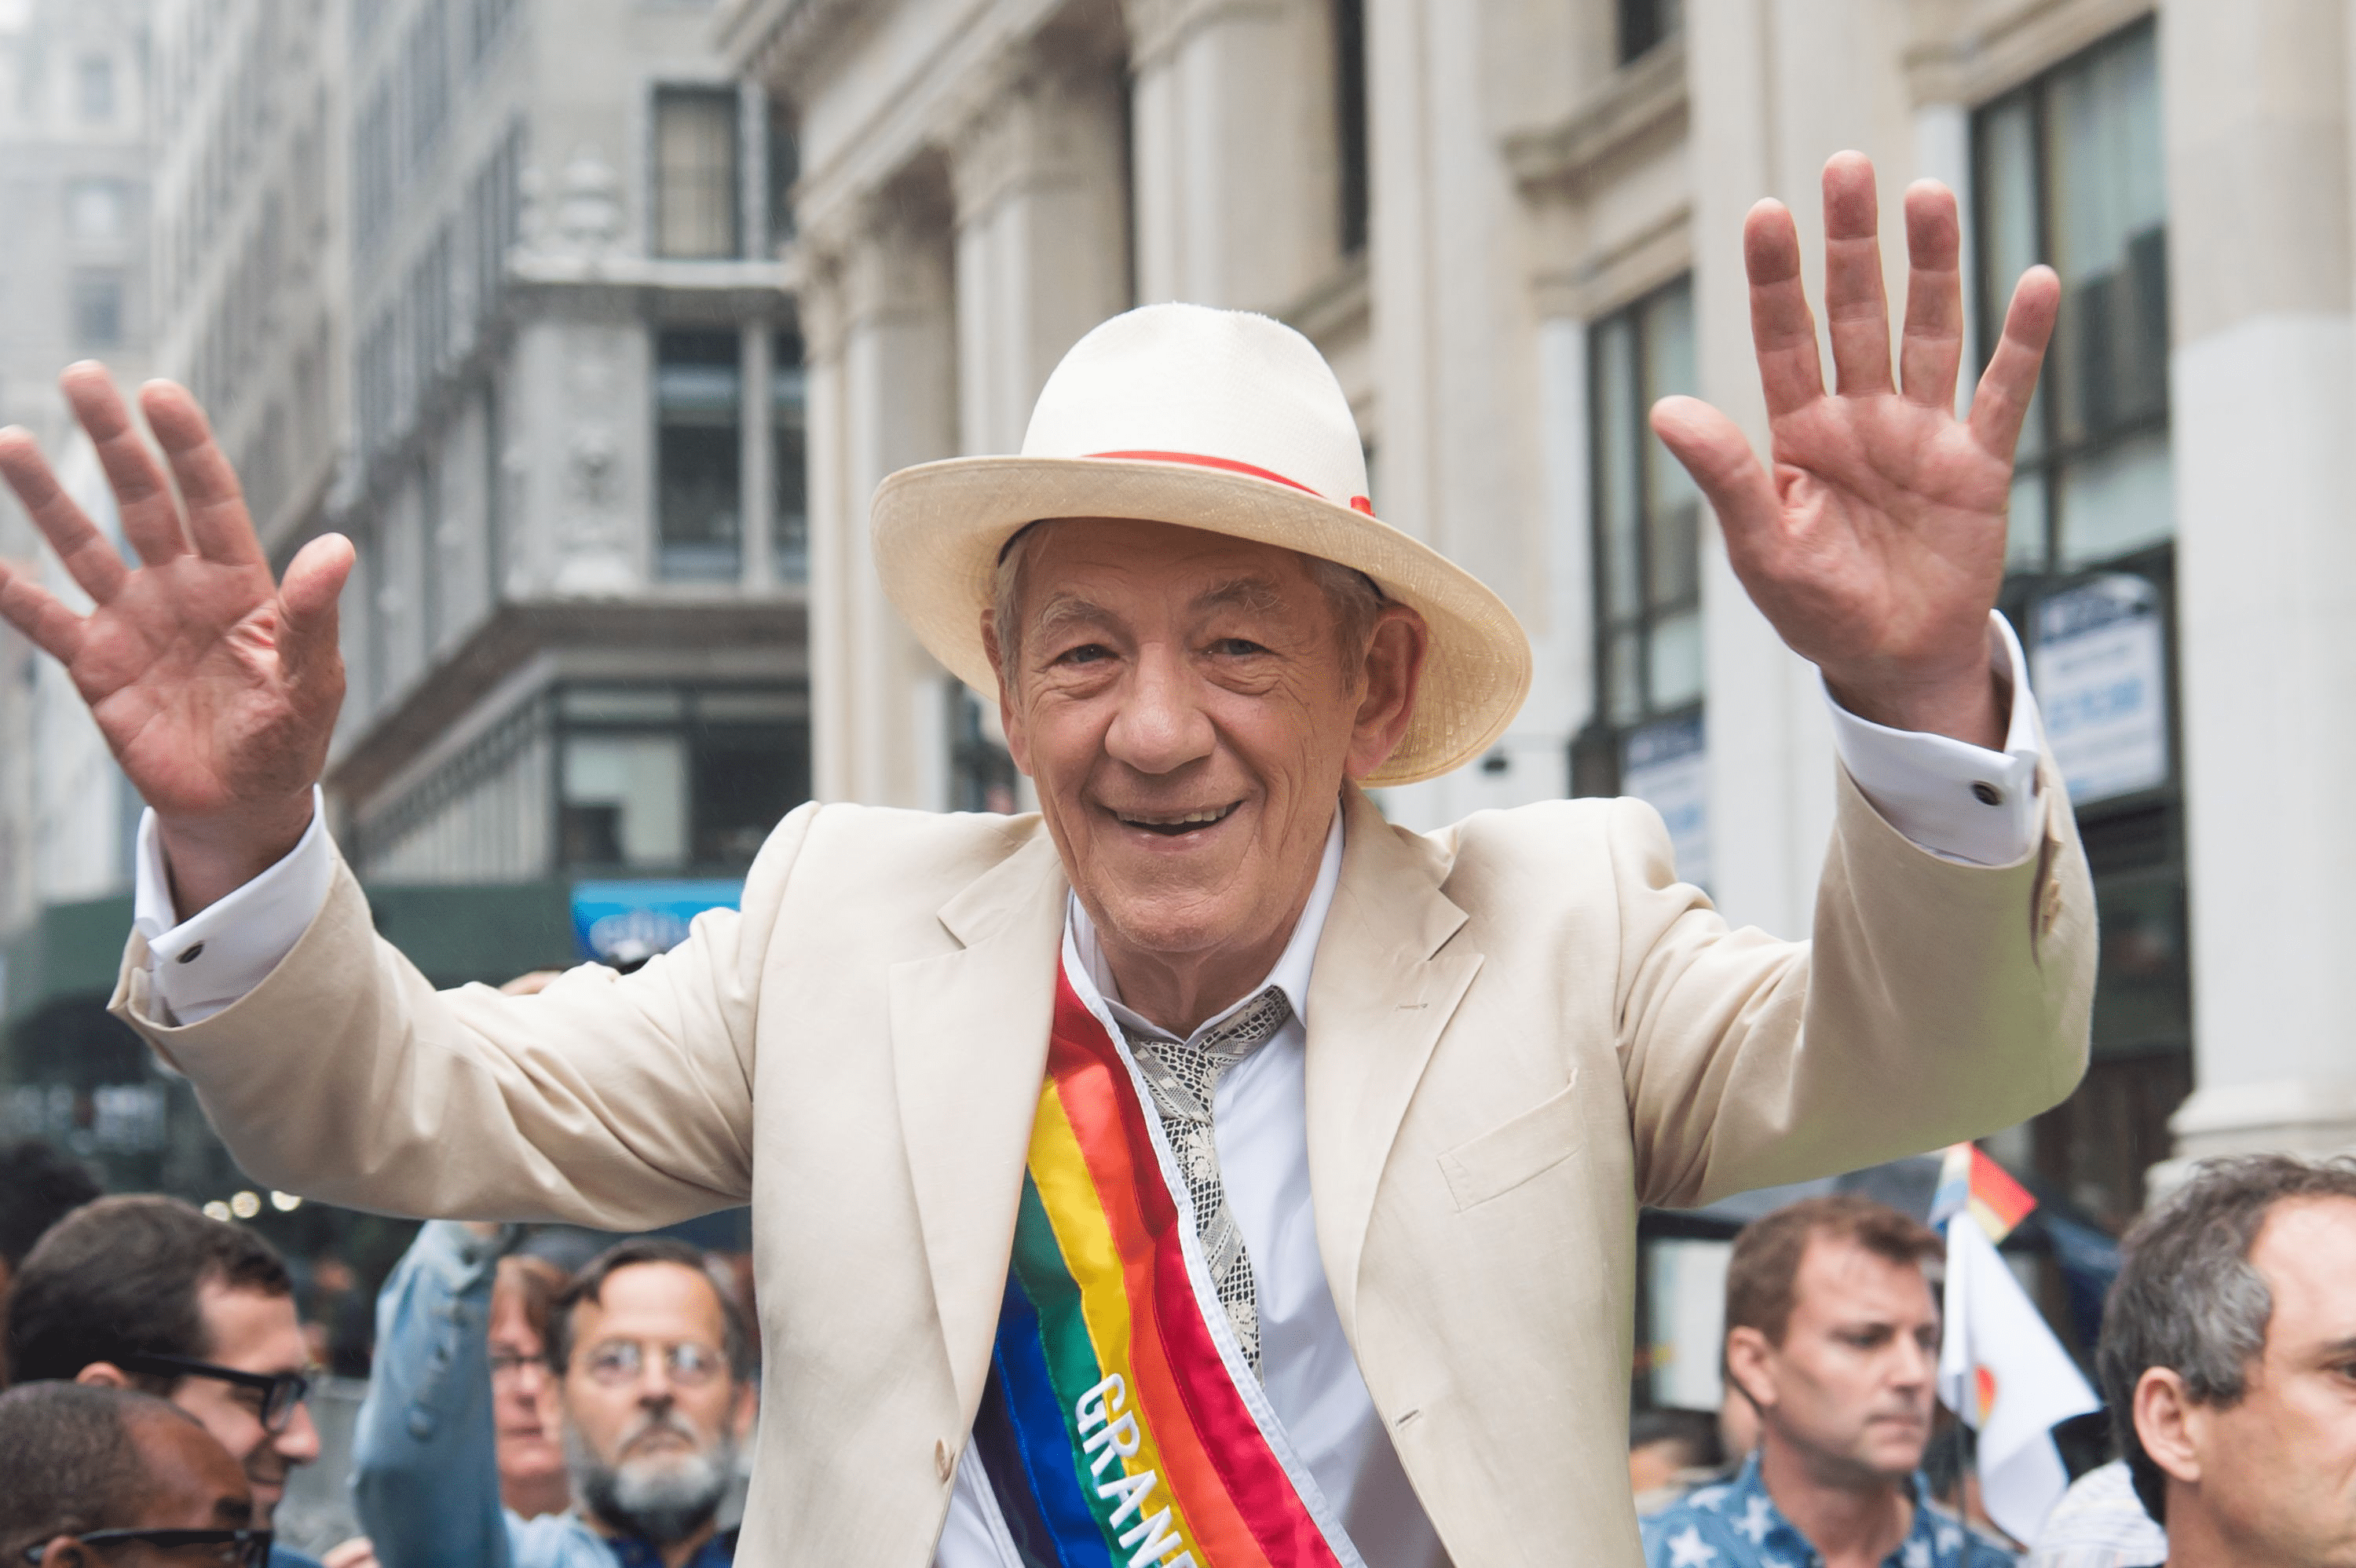 Sir Ian McKellan Says Coming Out As Gay Made His Life Change 'For The Better'